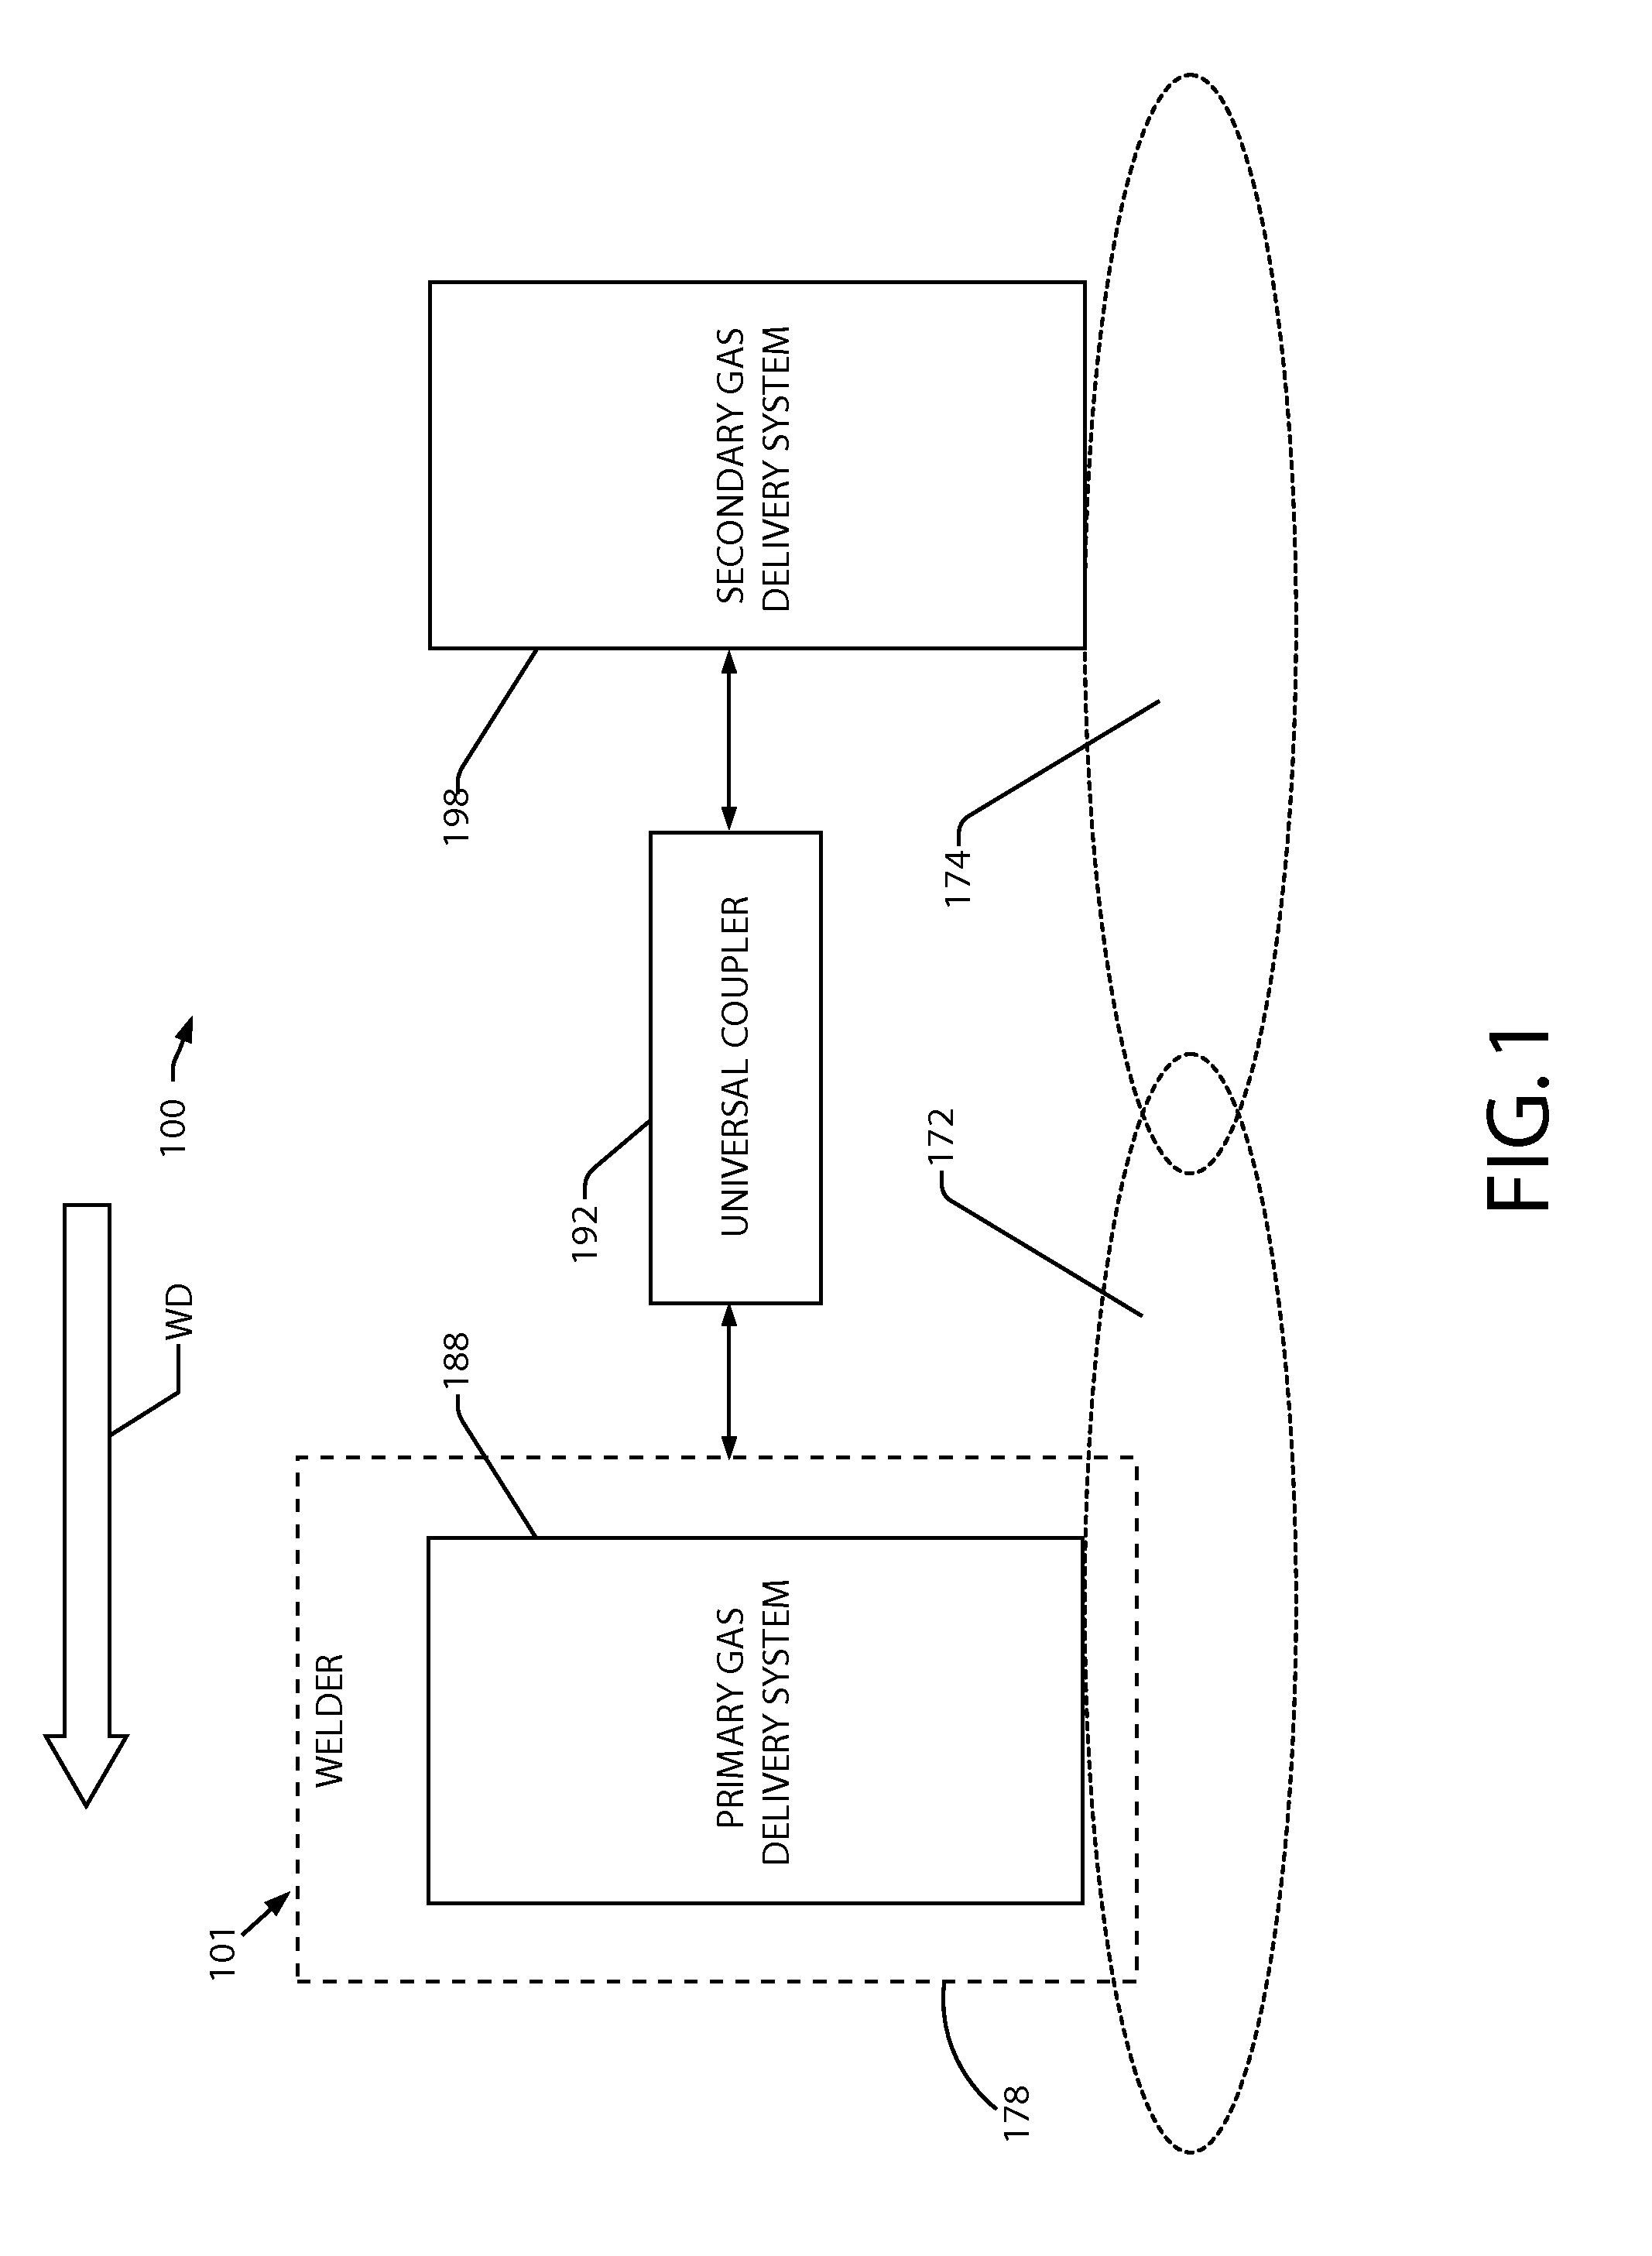 Gas shielding device for a welding system